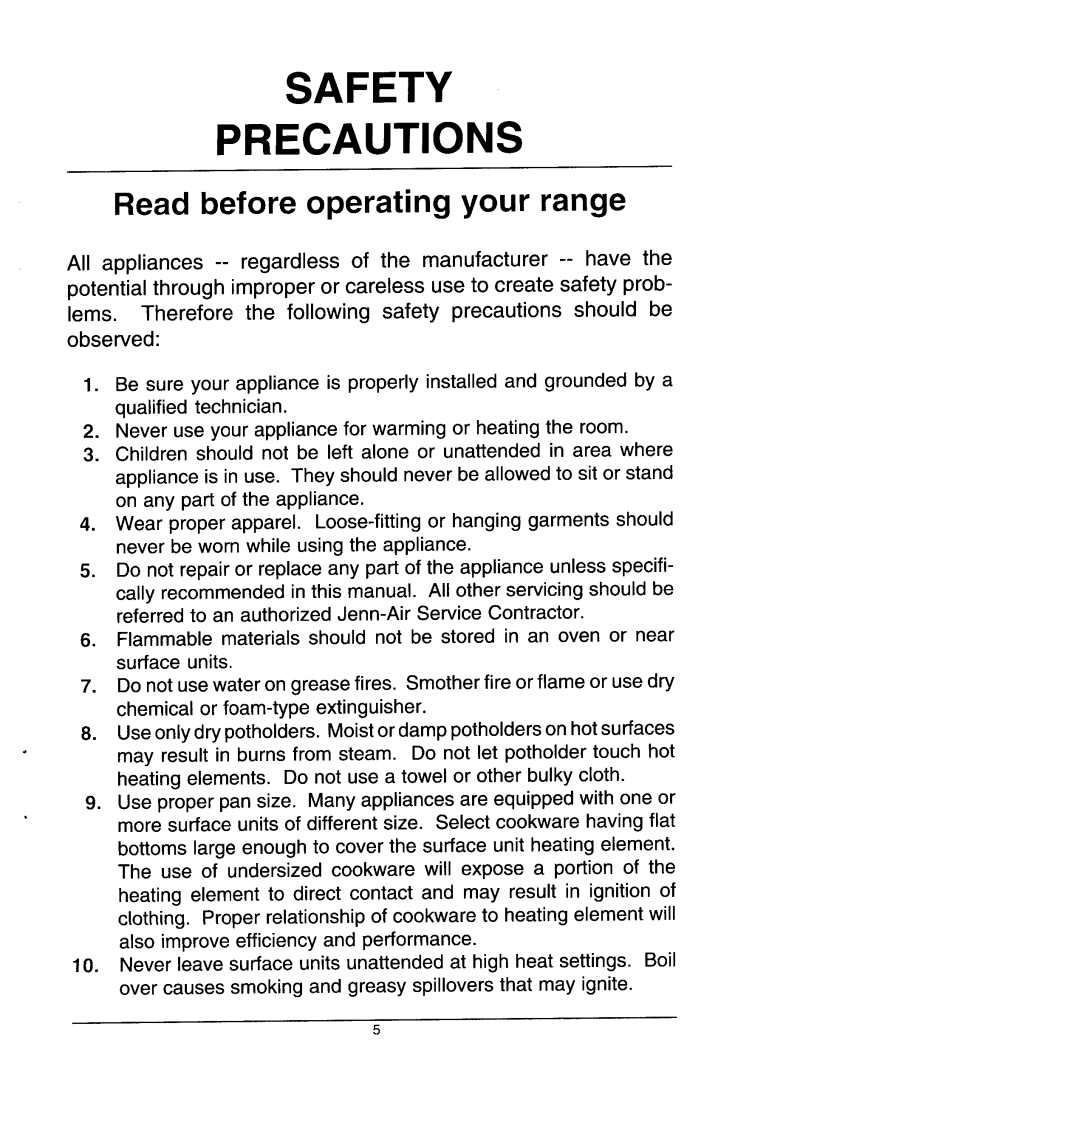 Jenn-Air SCE4340, SCE4320 manual Safety Precautions, Read before operating your range 